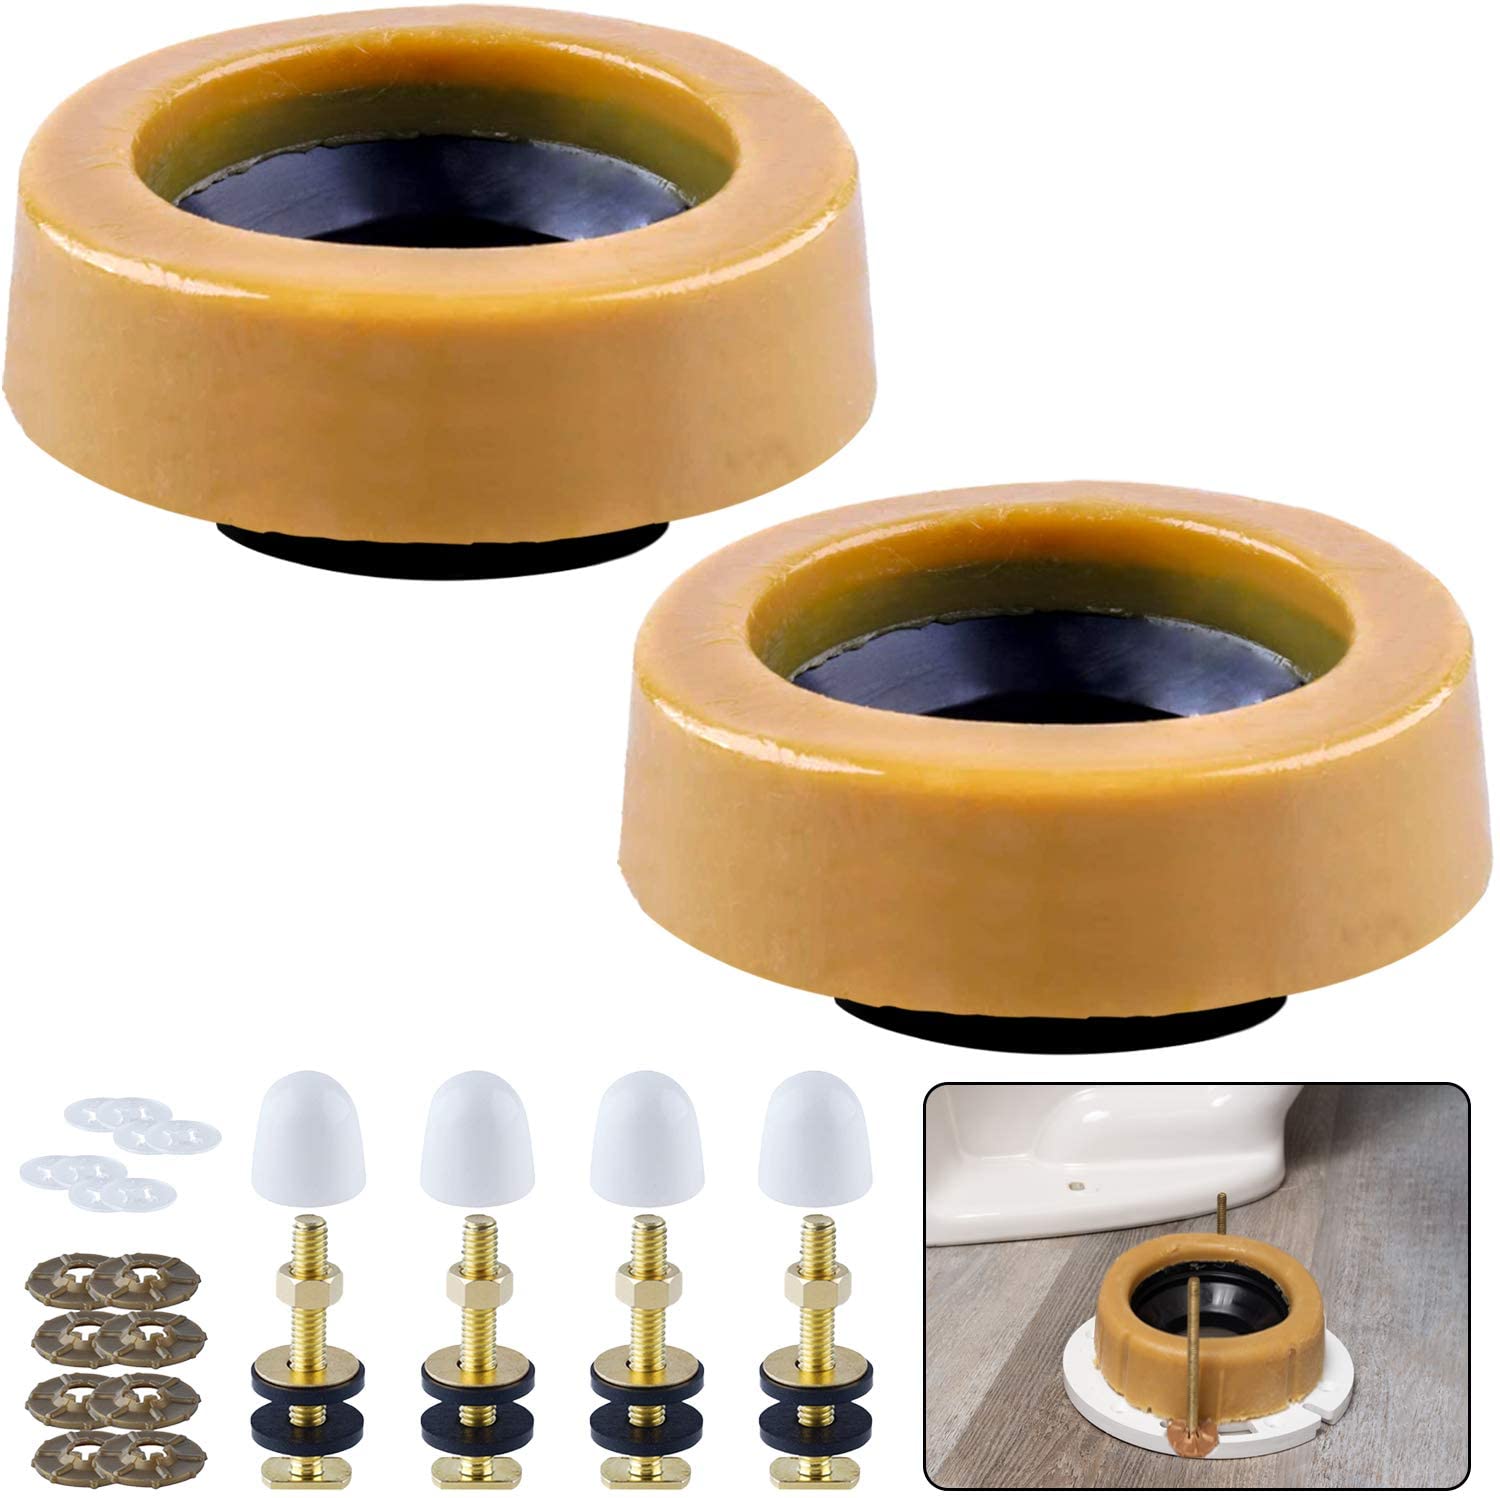 Extra Thick Wax Ring Toilet Kit